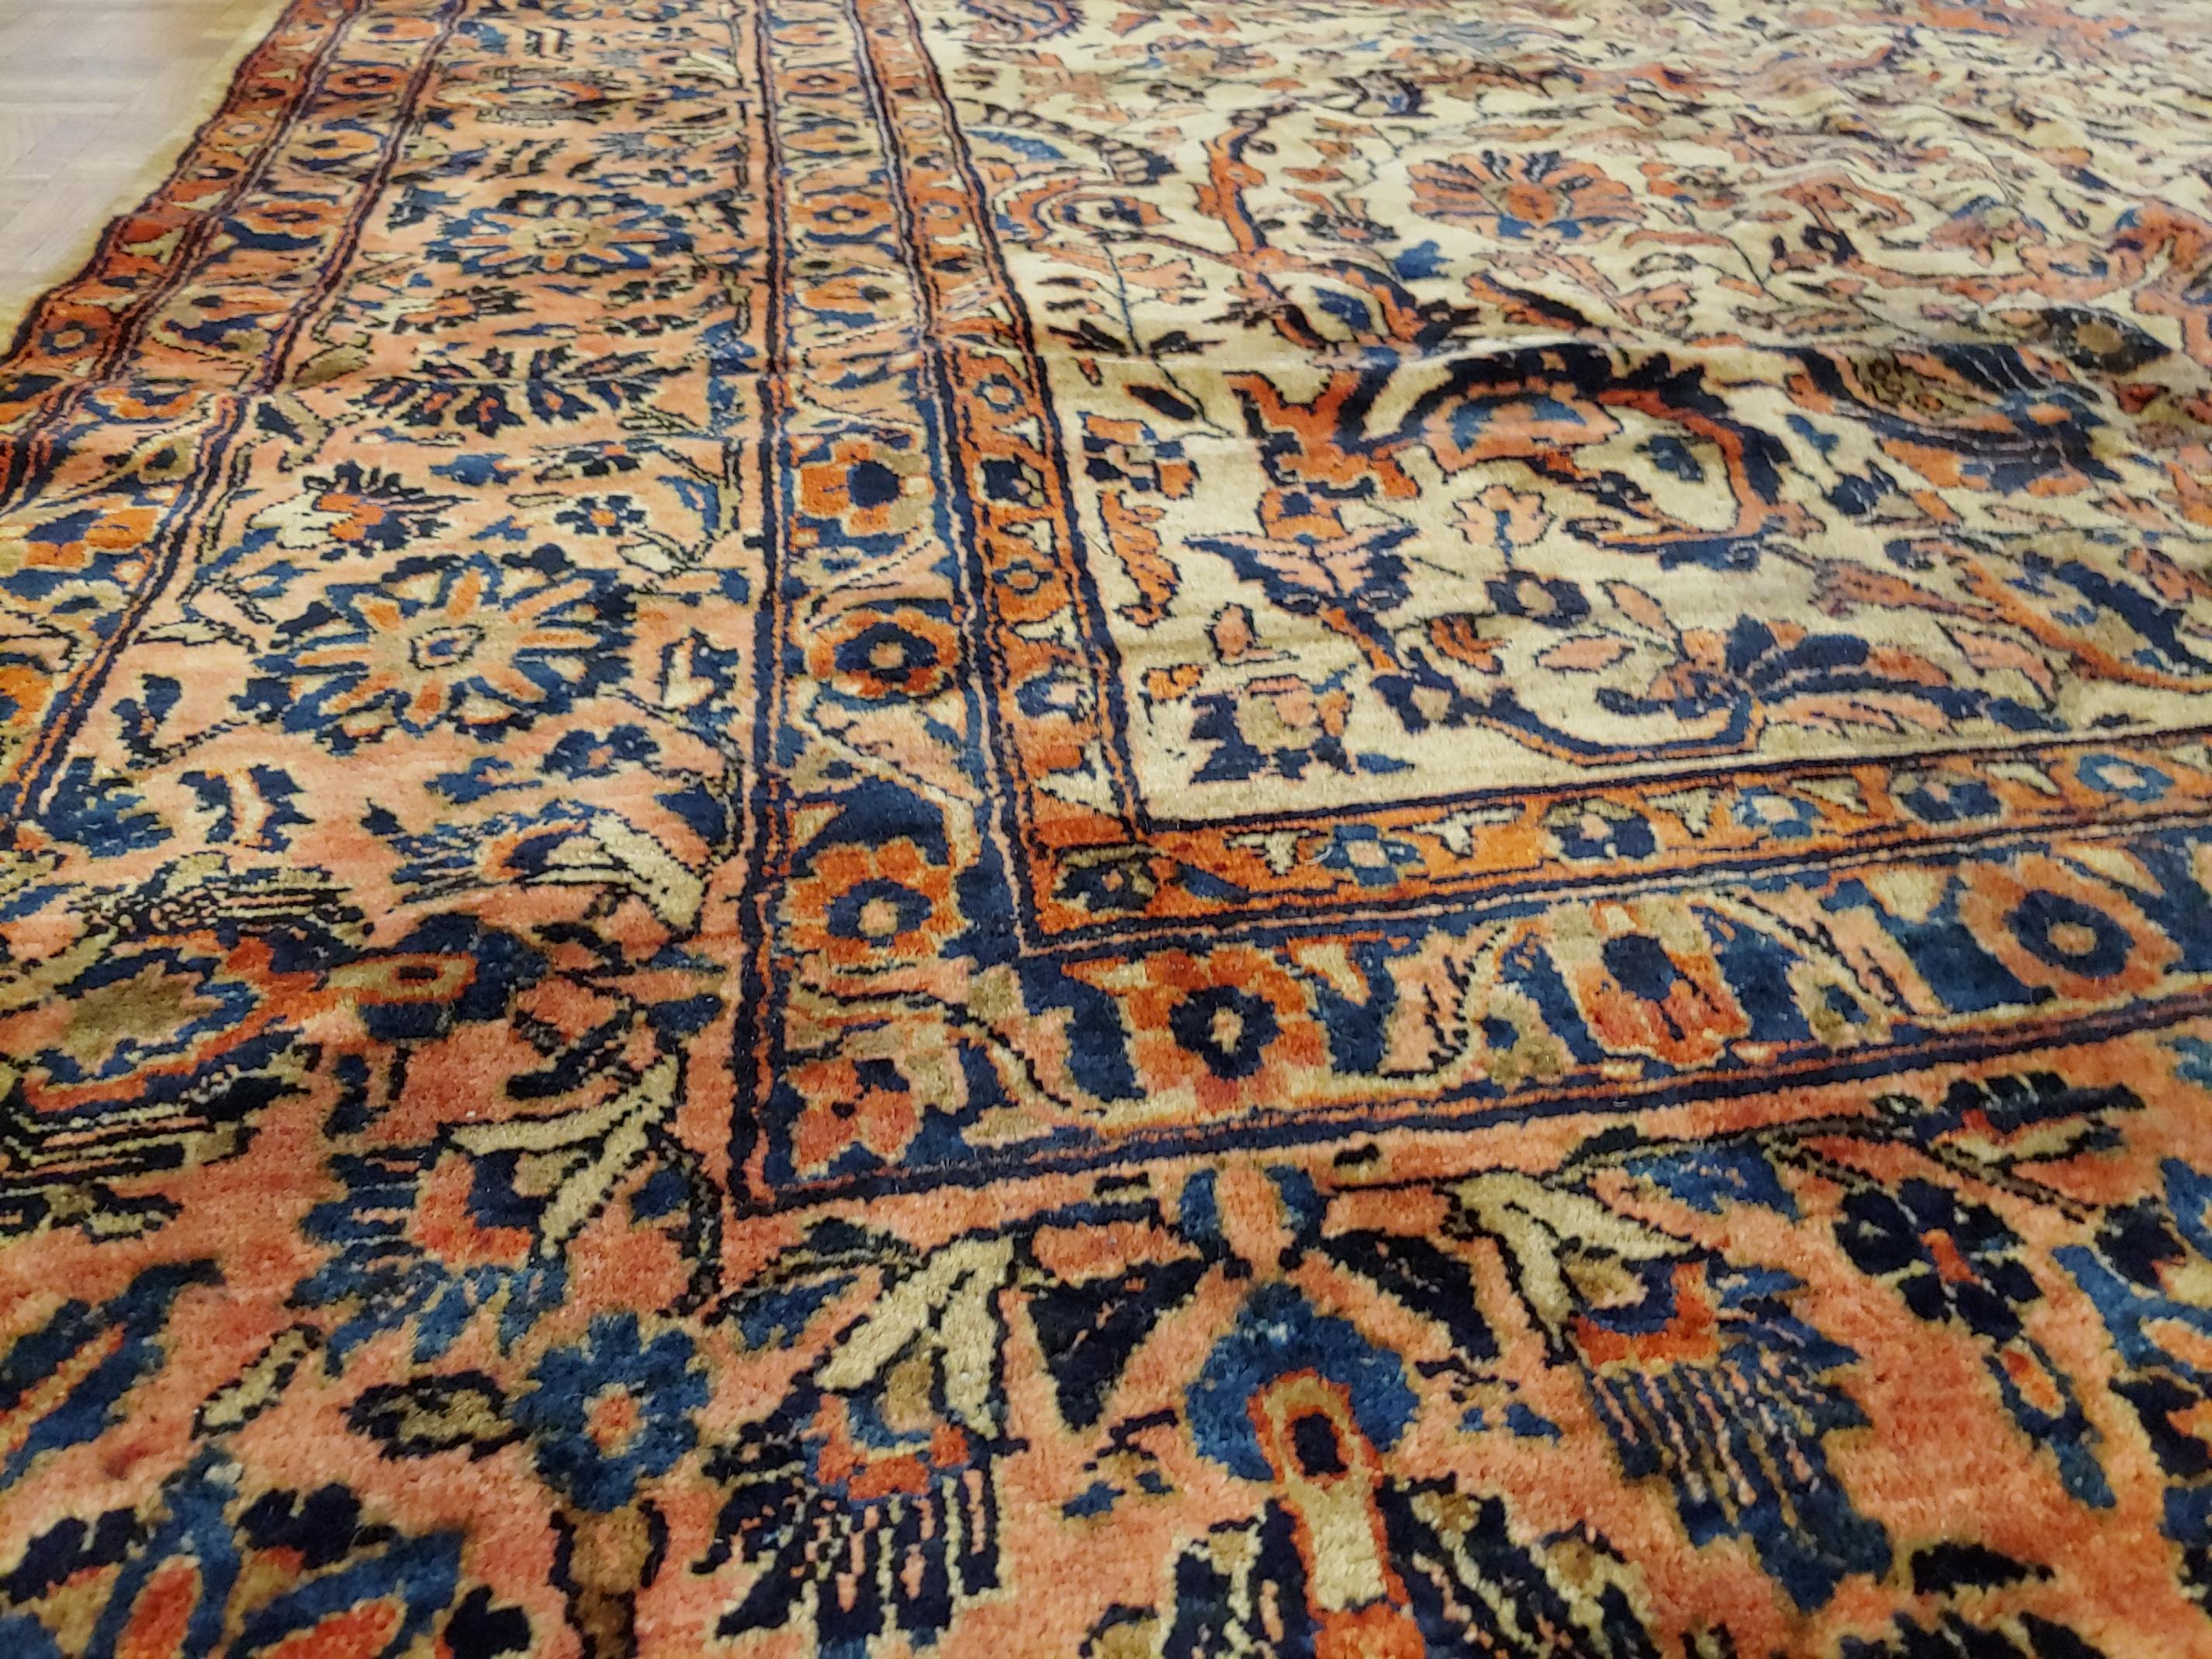 Antique Persian Sarouk, Floral Design, Gold Background, Wool, Room Size, 1915 In Good Condition For Sale In Williamsburg, VA